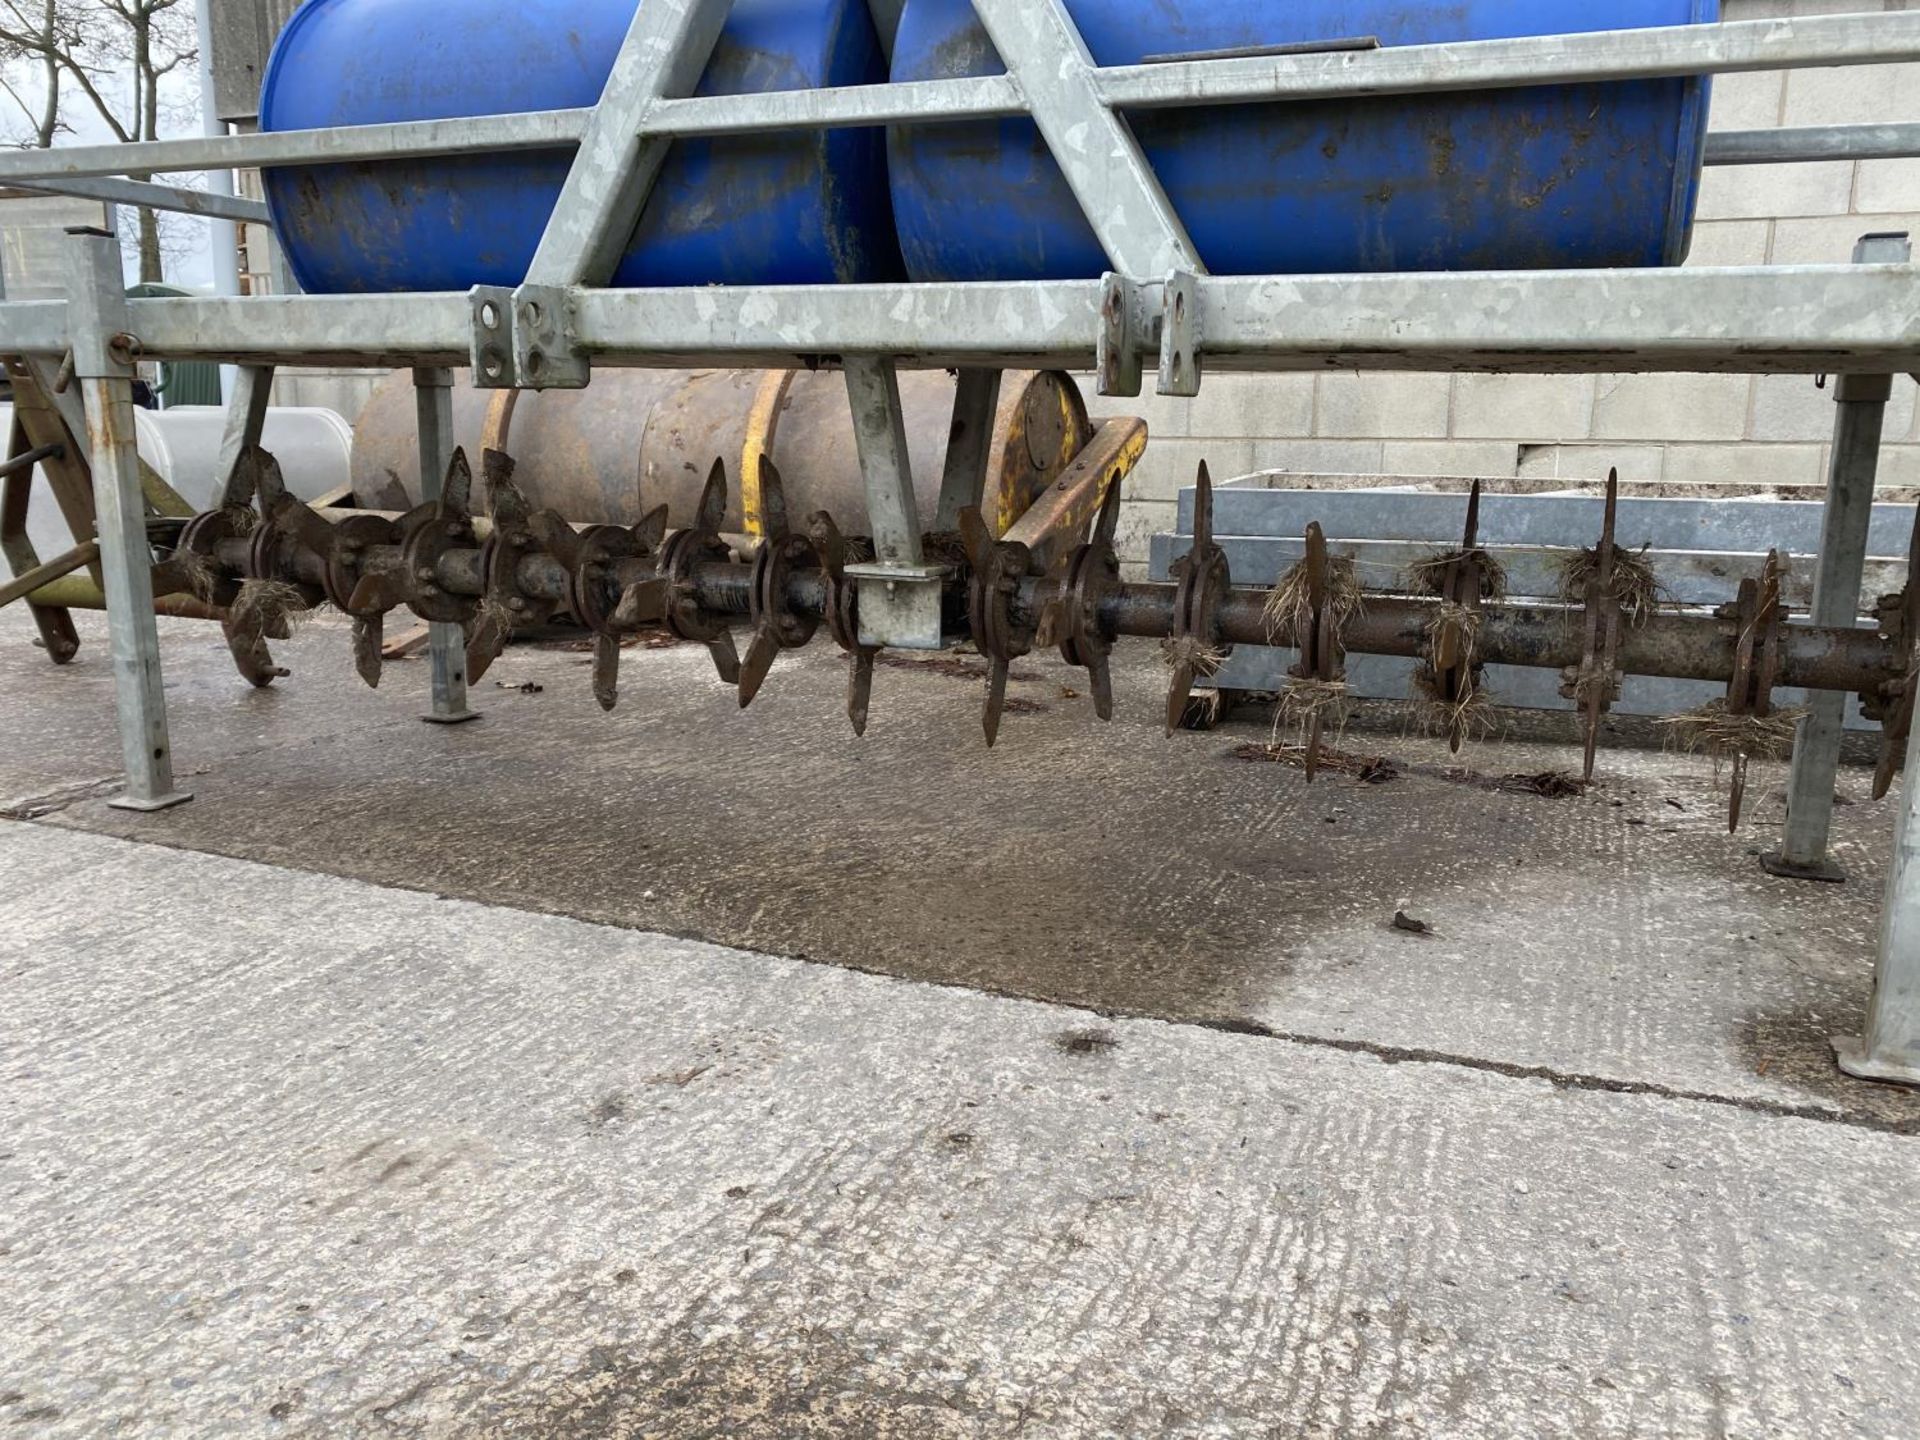 M & K GRASSLAND AERATOR - 3M (10 FOOT ) WIDE - 54 BLADES CAN BE ANGLED - EX HIRE MODEL -BELIEVED - Image 3 of 3